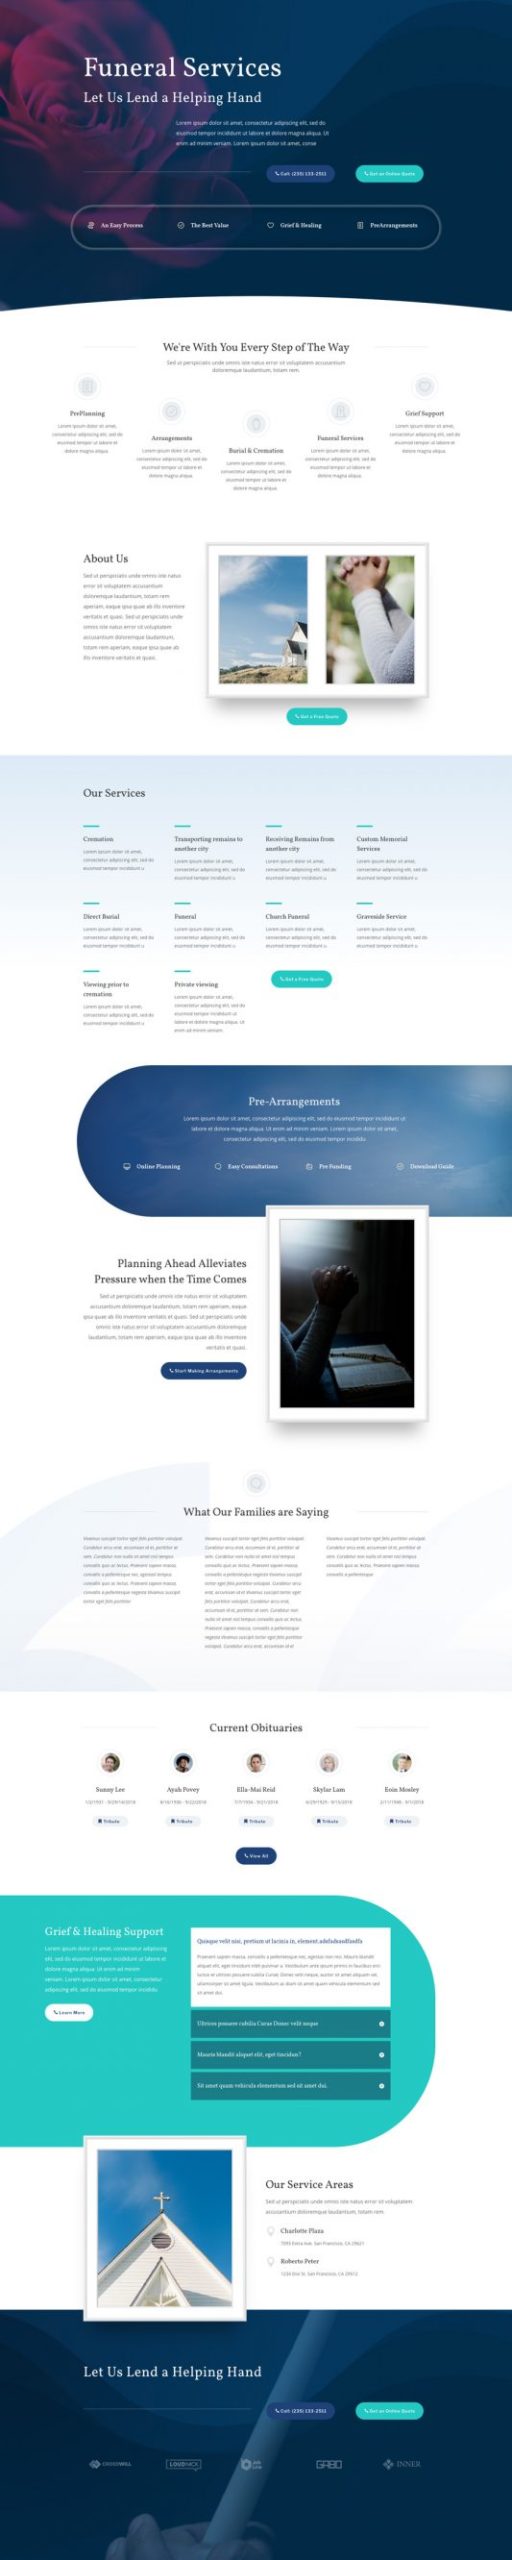 Funeral Services Landing Page